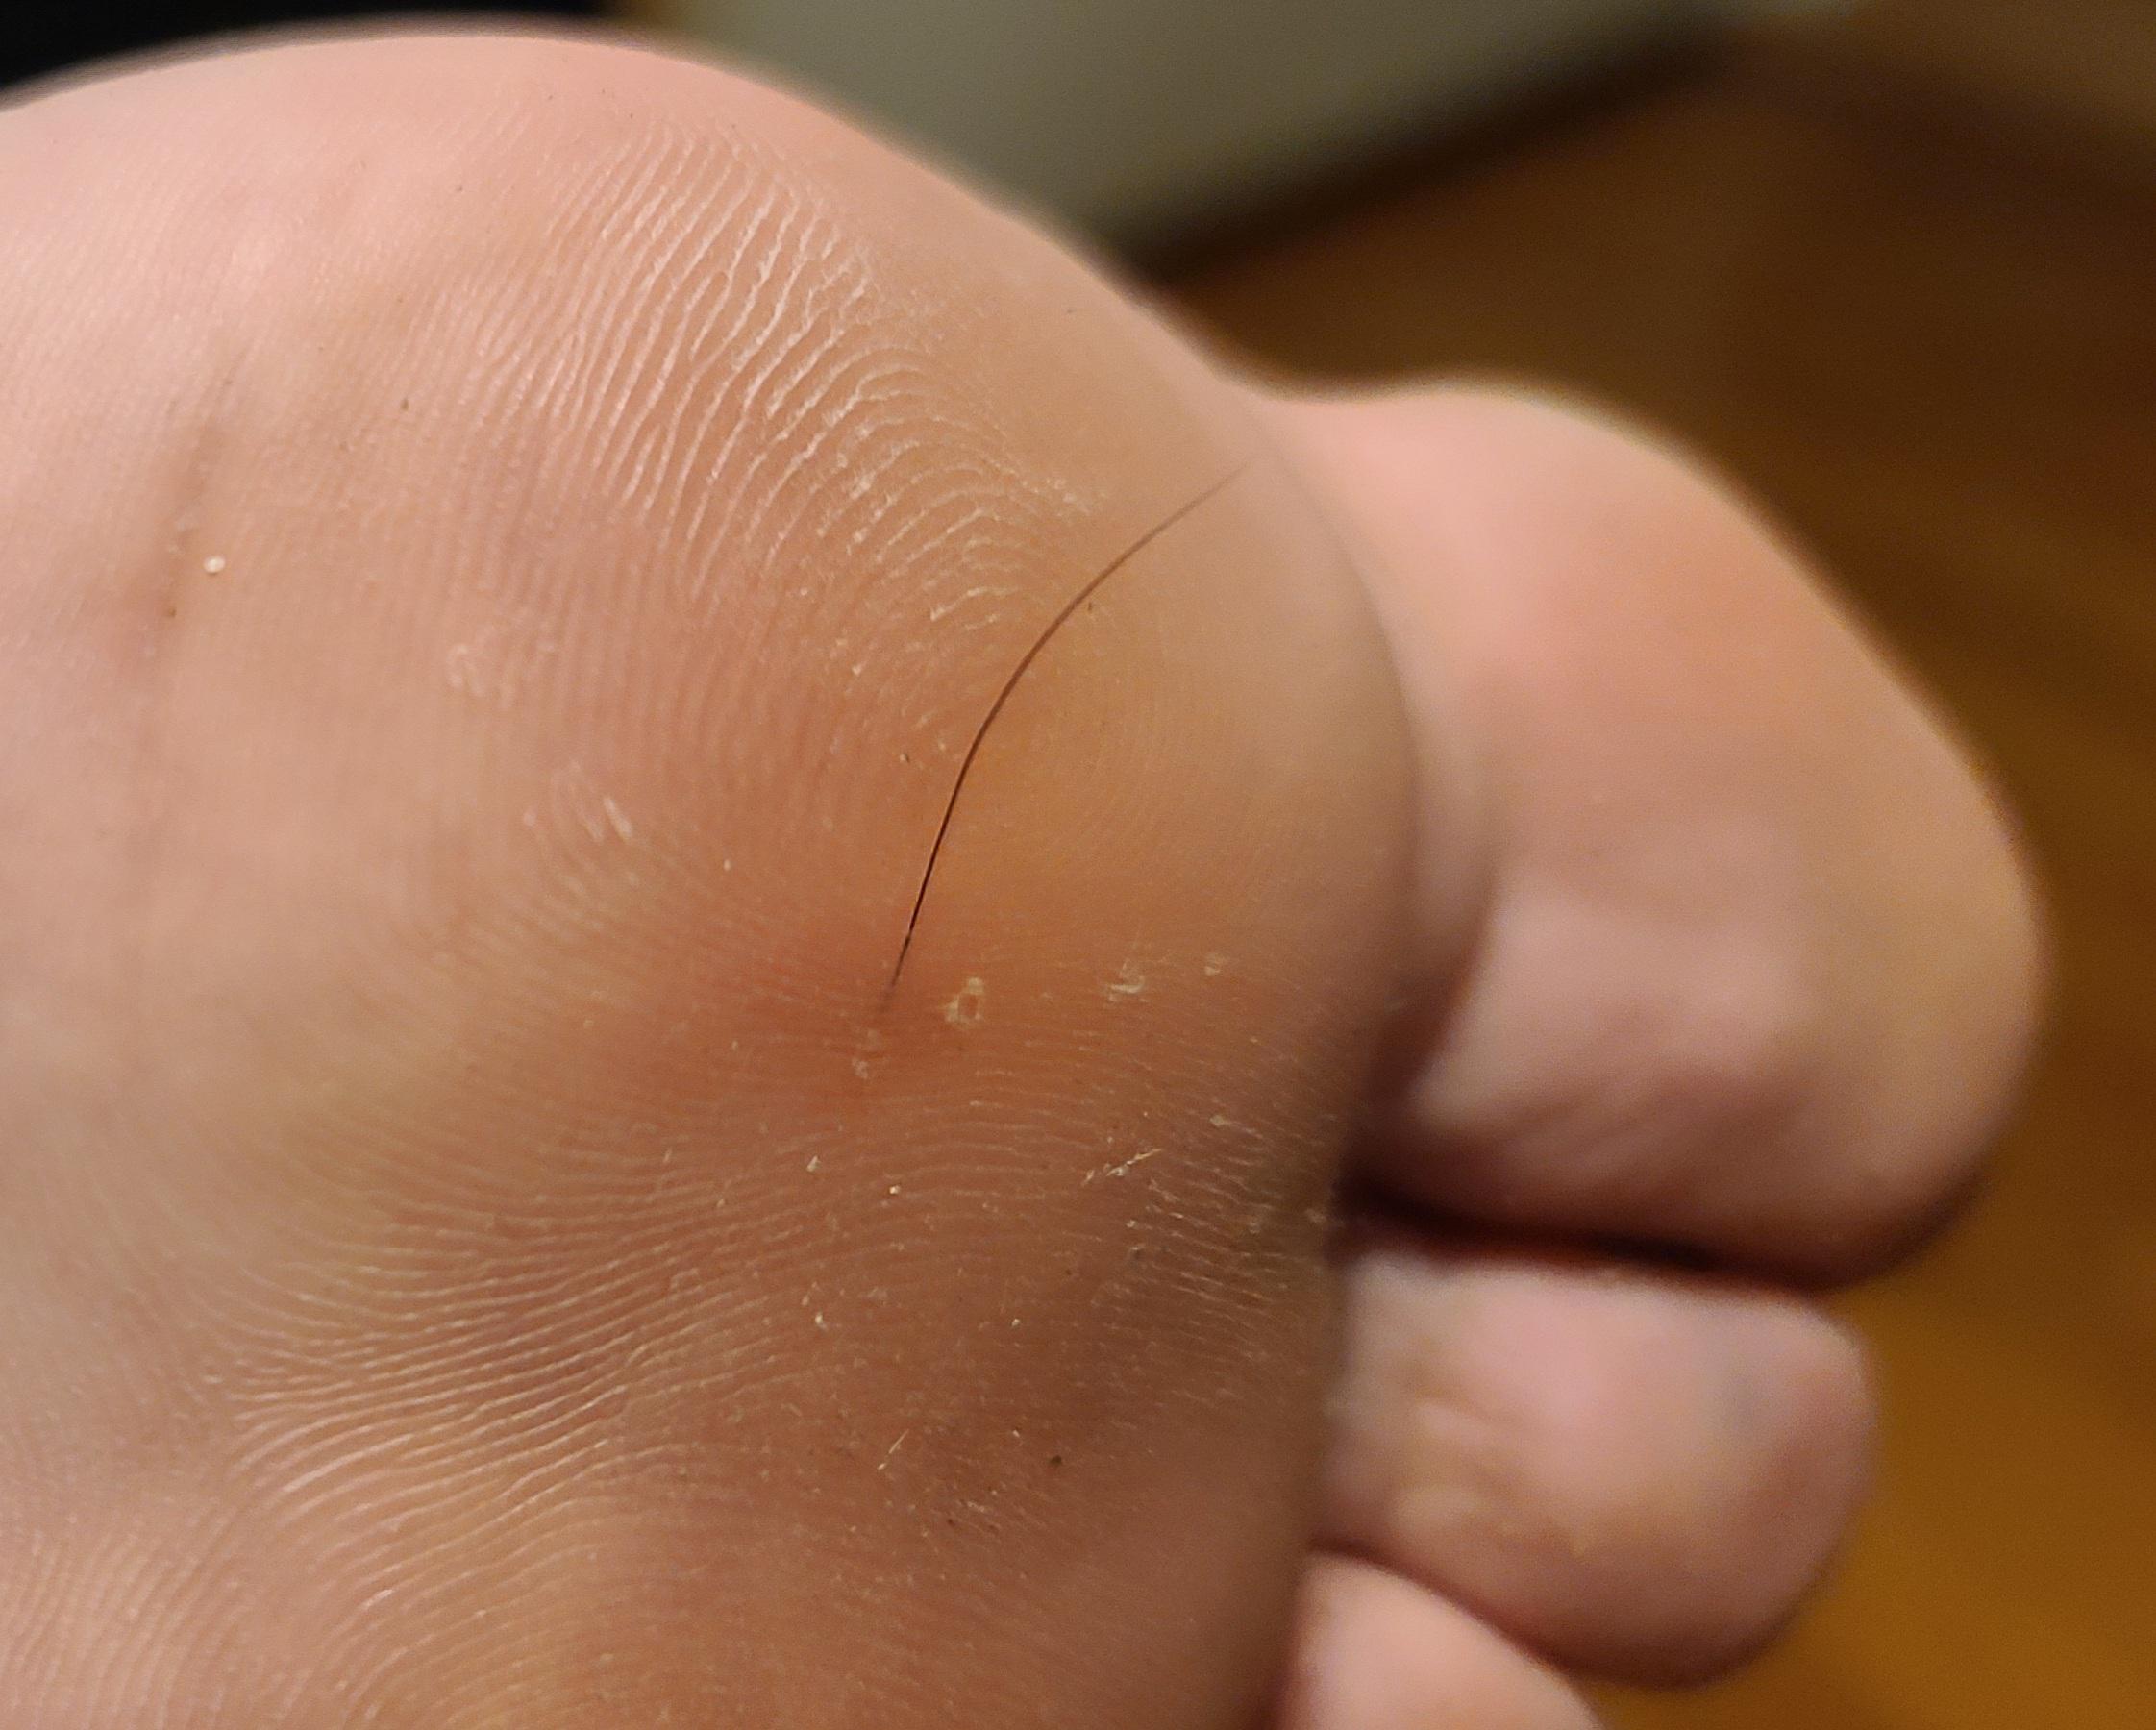 How To Remove A Deep Hair Splinter From Your Foot At Home During Lockdown